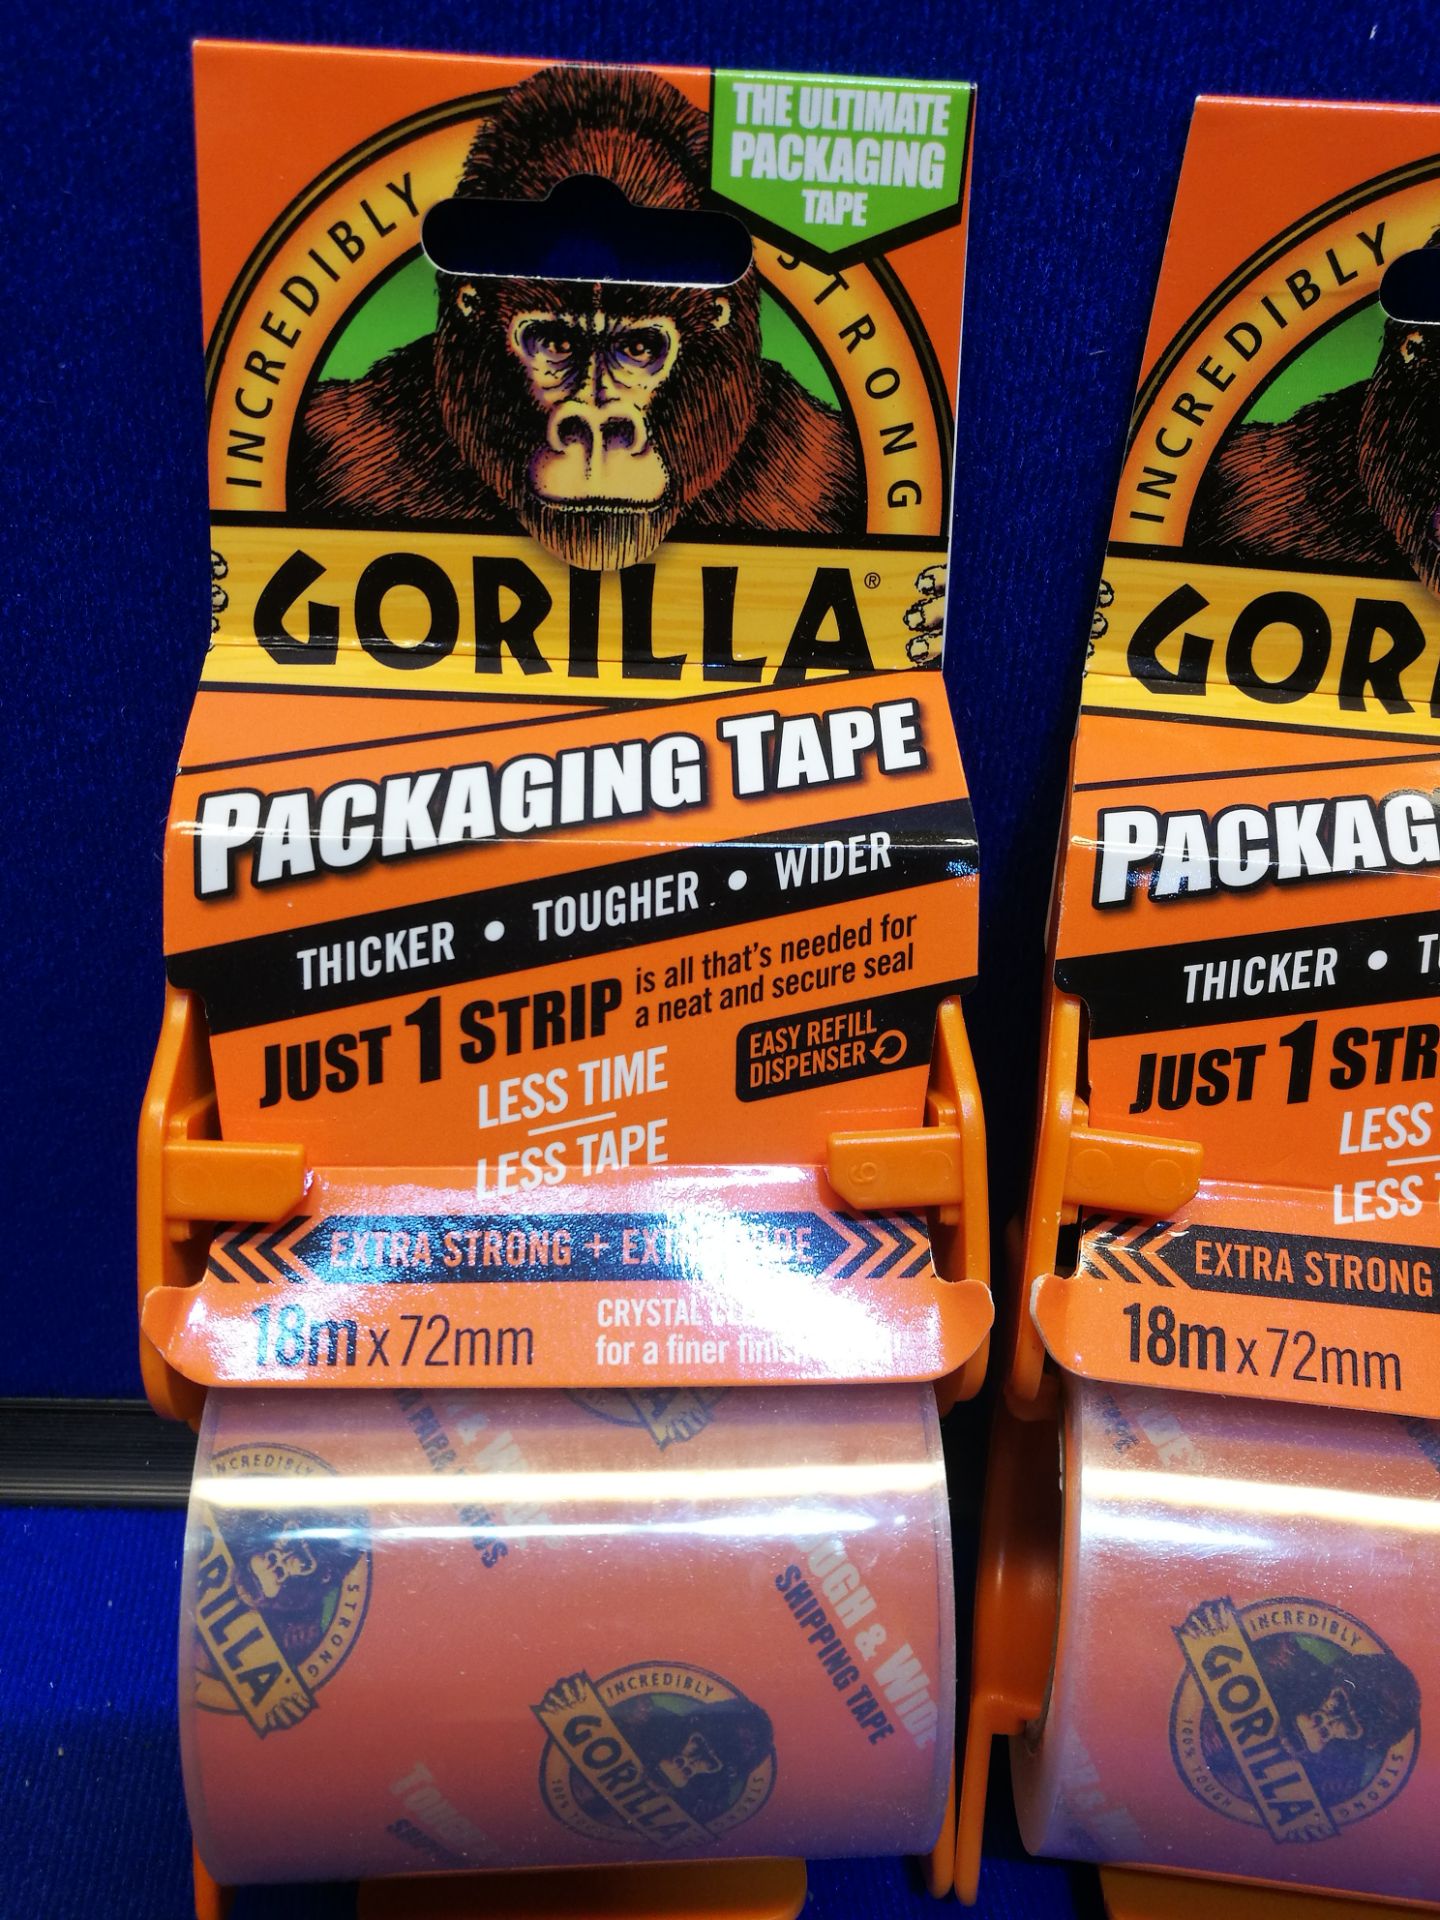 4x Rolls Gorilla Clear Packaging Tape - 18m x 72mm - Image 2 of 3